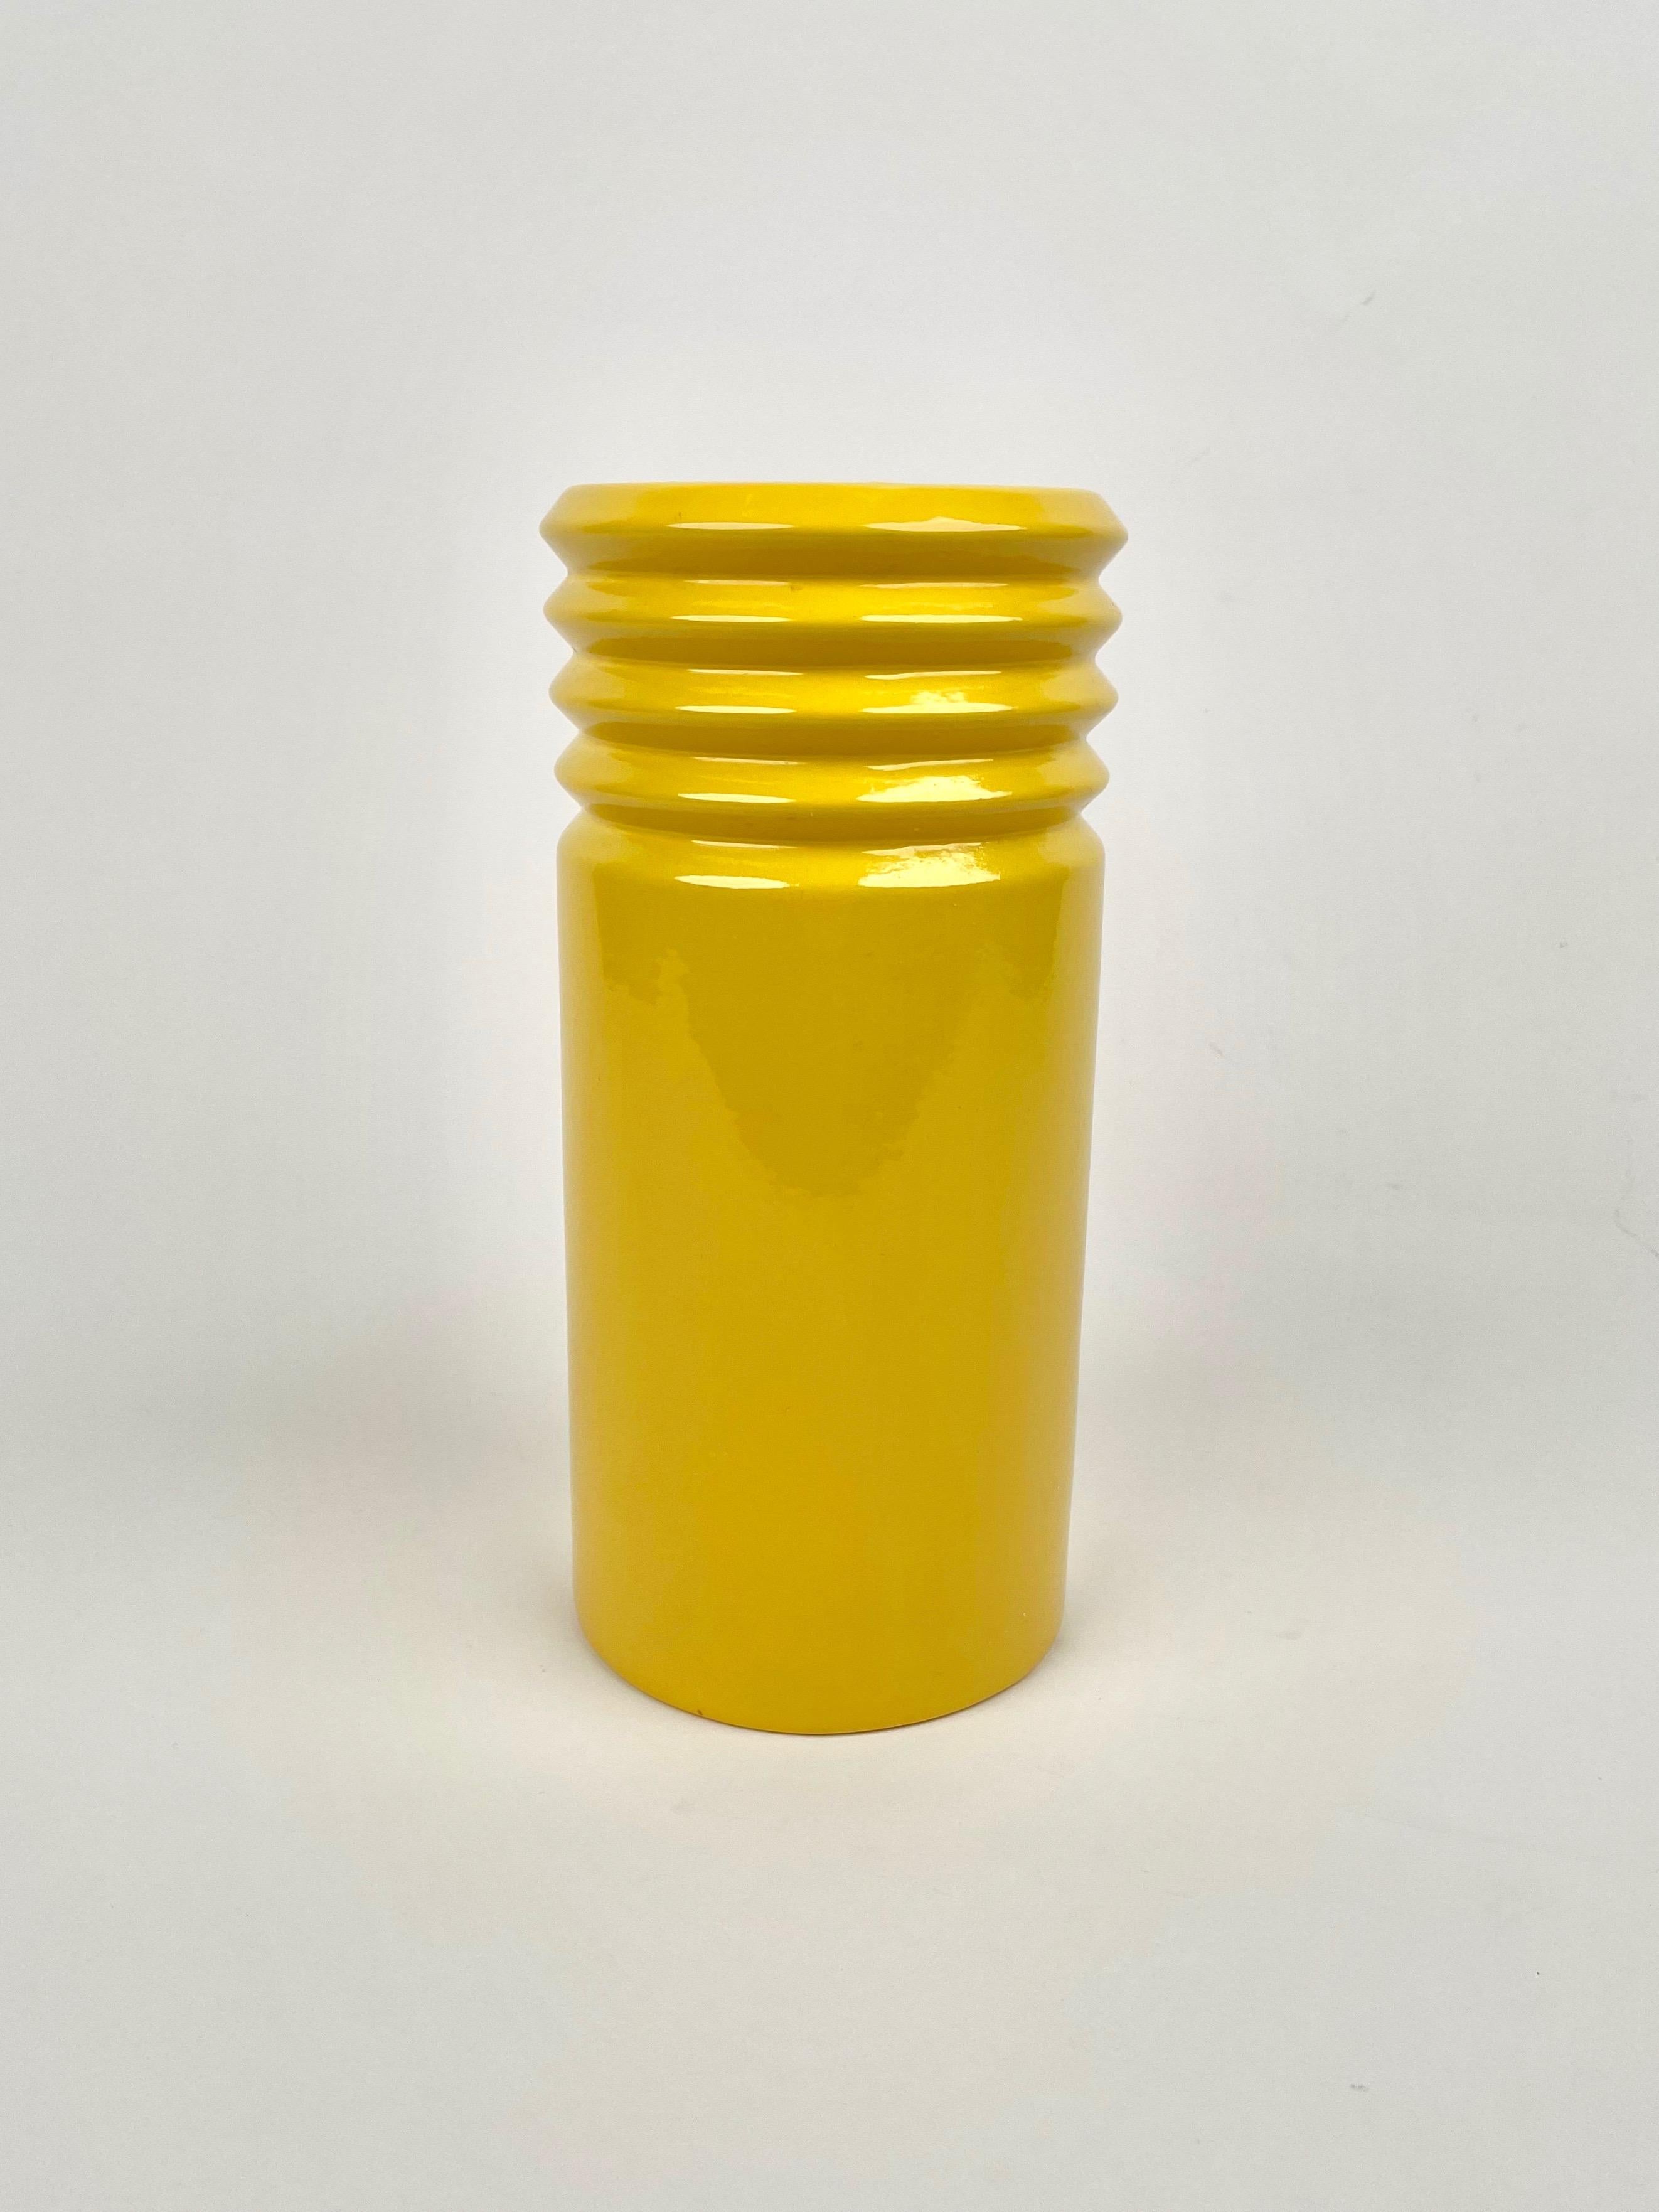 Italian Yellow Ceramic Cylindric Vase by Il Picchio, Italy, 1960s For Sale